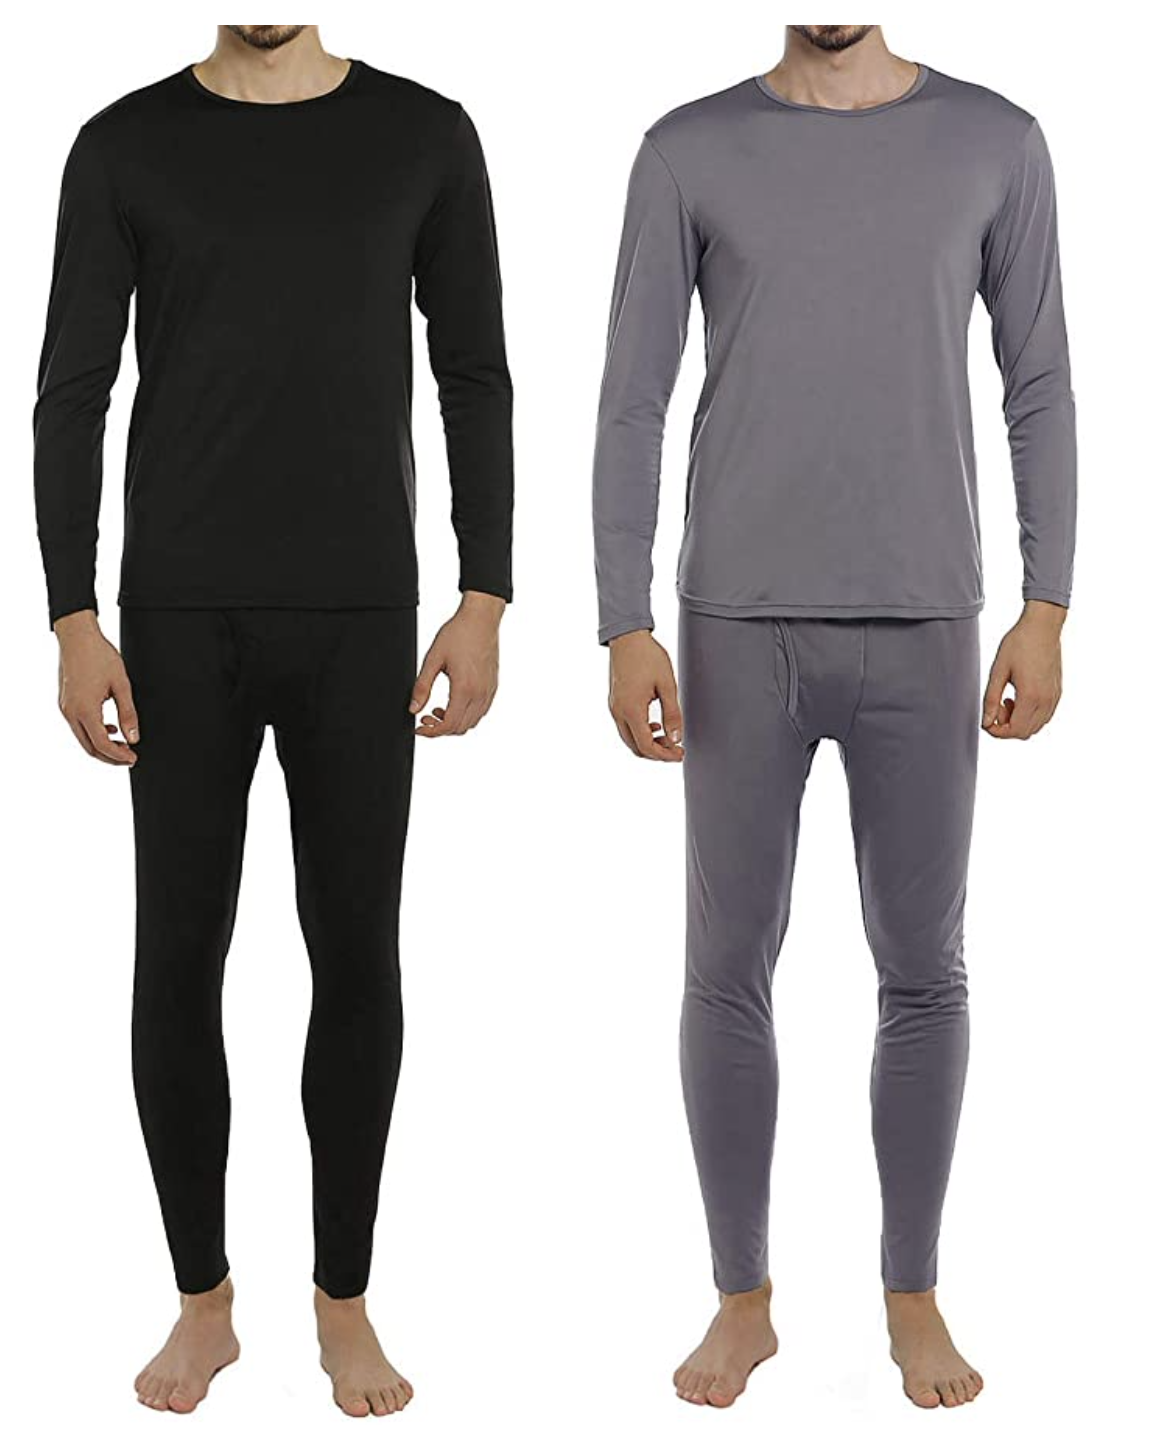 Thermal Underwear Set Long Johns Fleece Lined Warm Base Layer Thermals 2 Sets